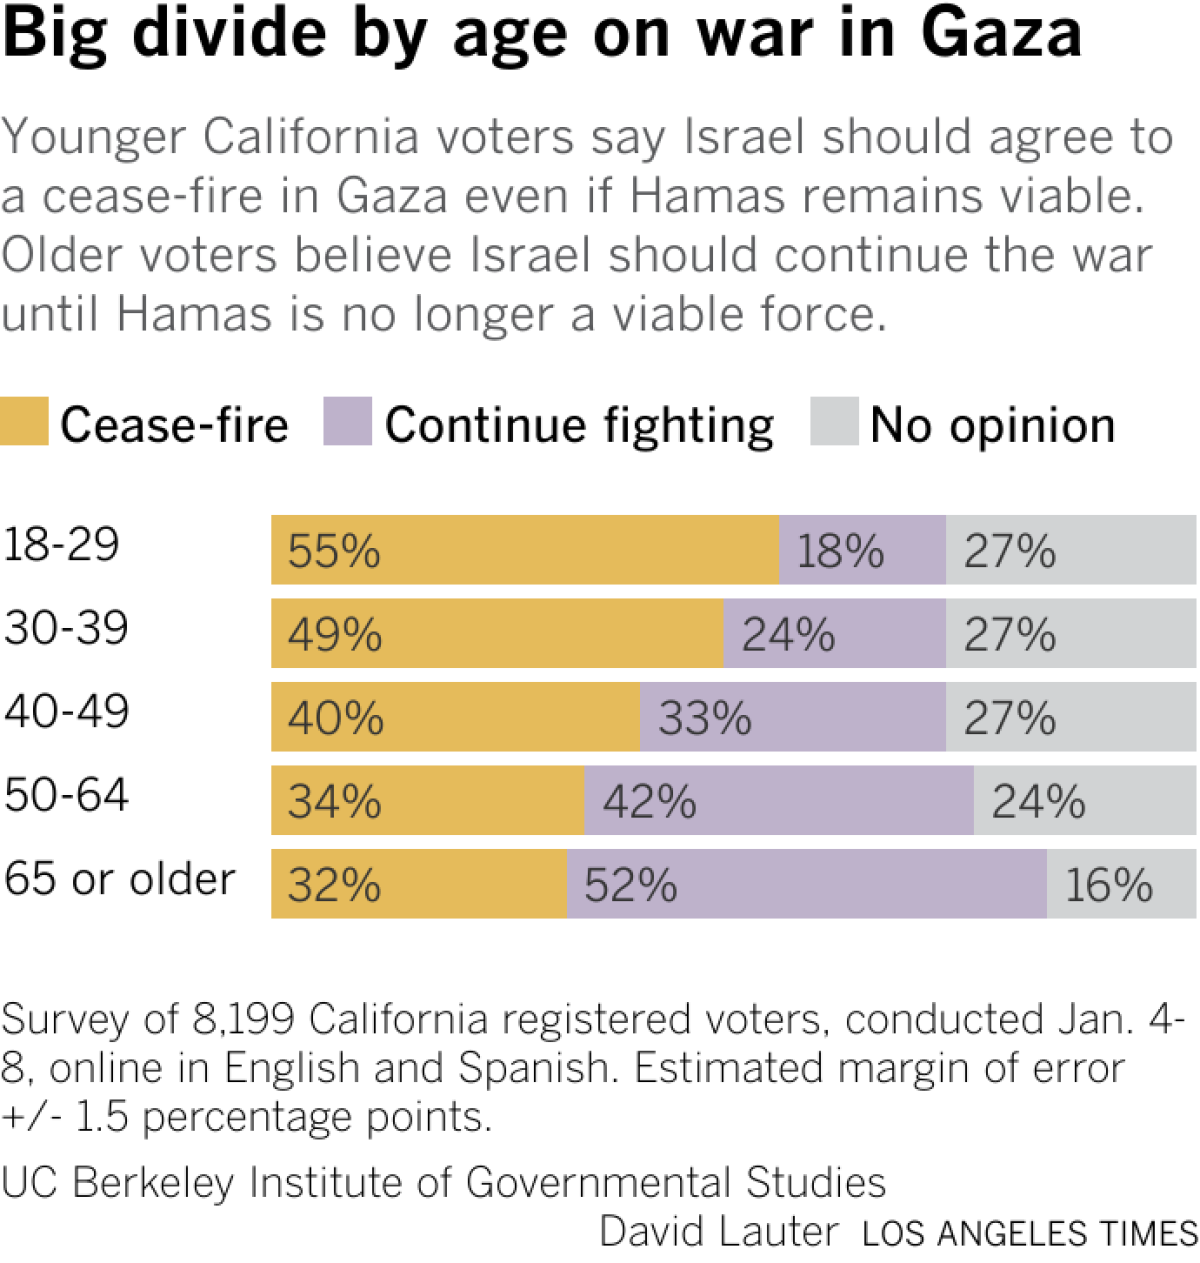 Younger California voters say Israel should agree to a ceasefire in Gaza even if Hamas remains viable.  Older voters believe Israel should continue the war until Hamas is no longer a viable force.